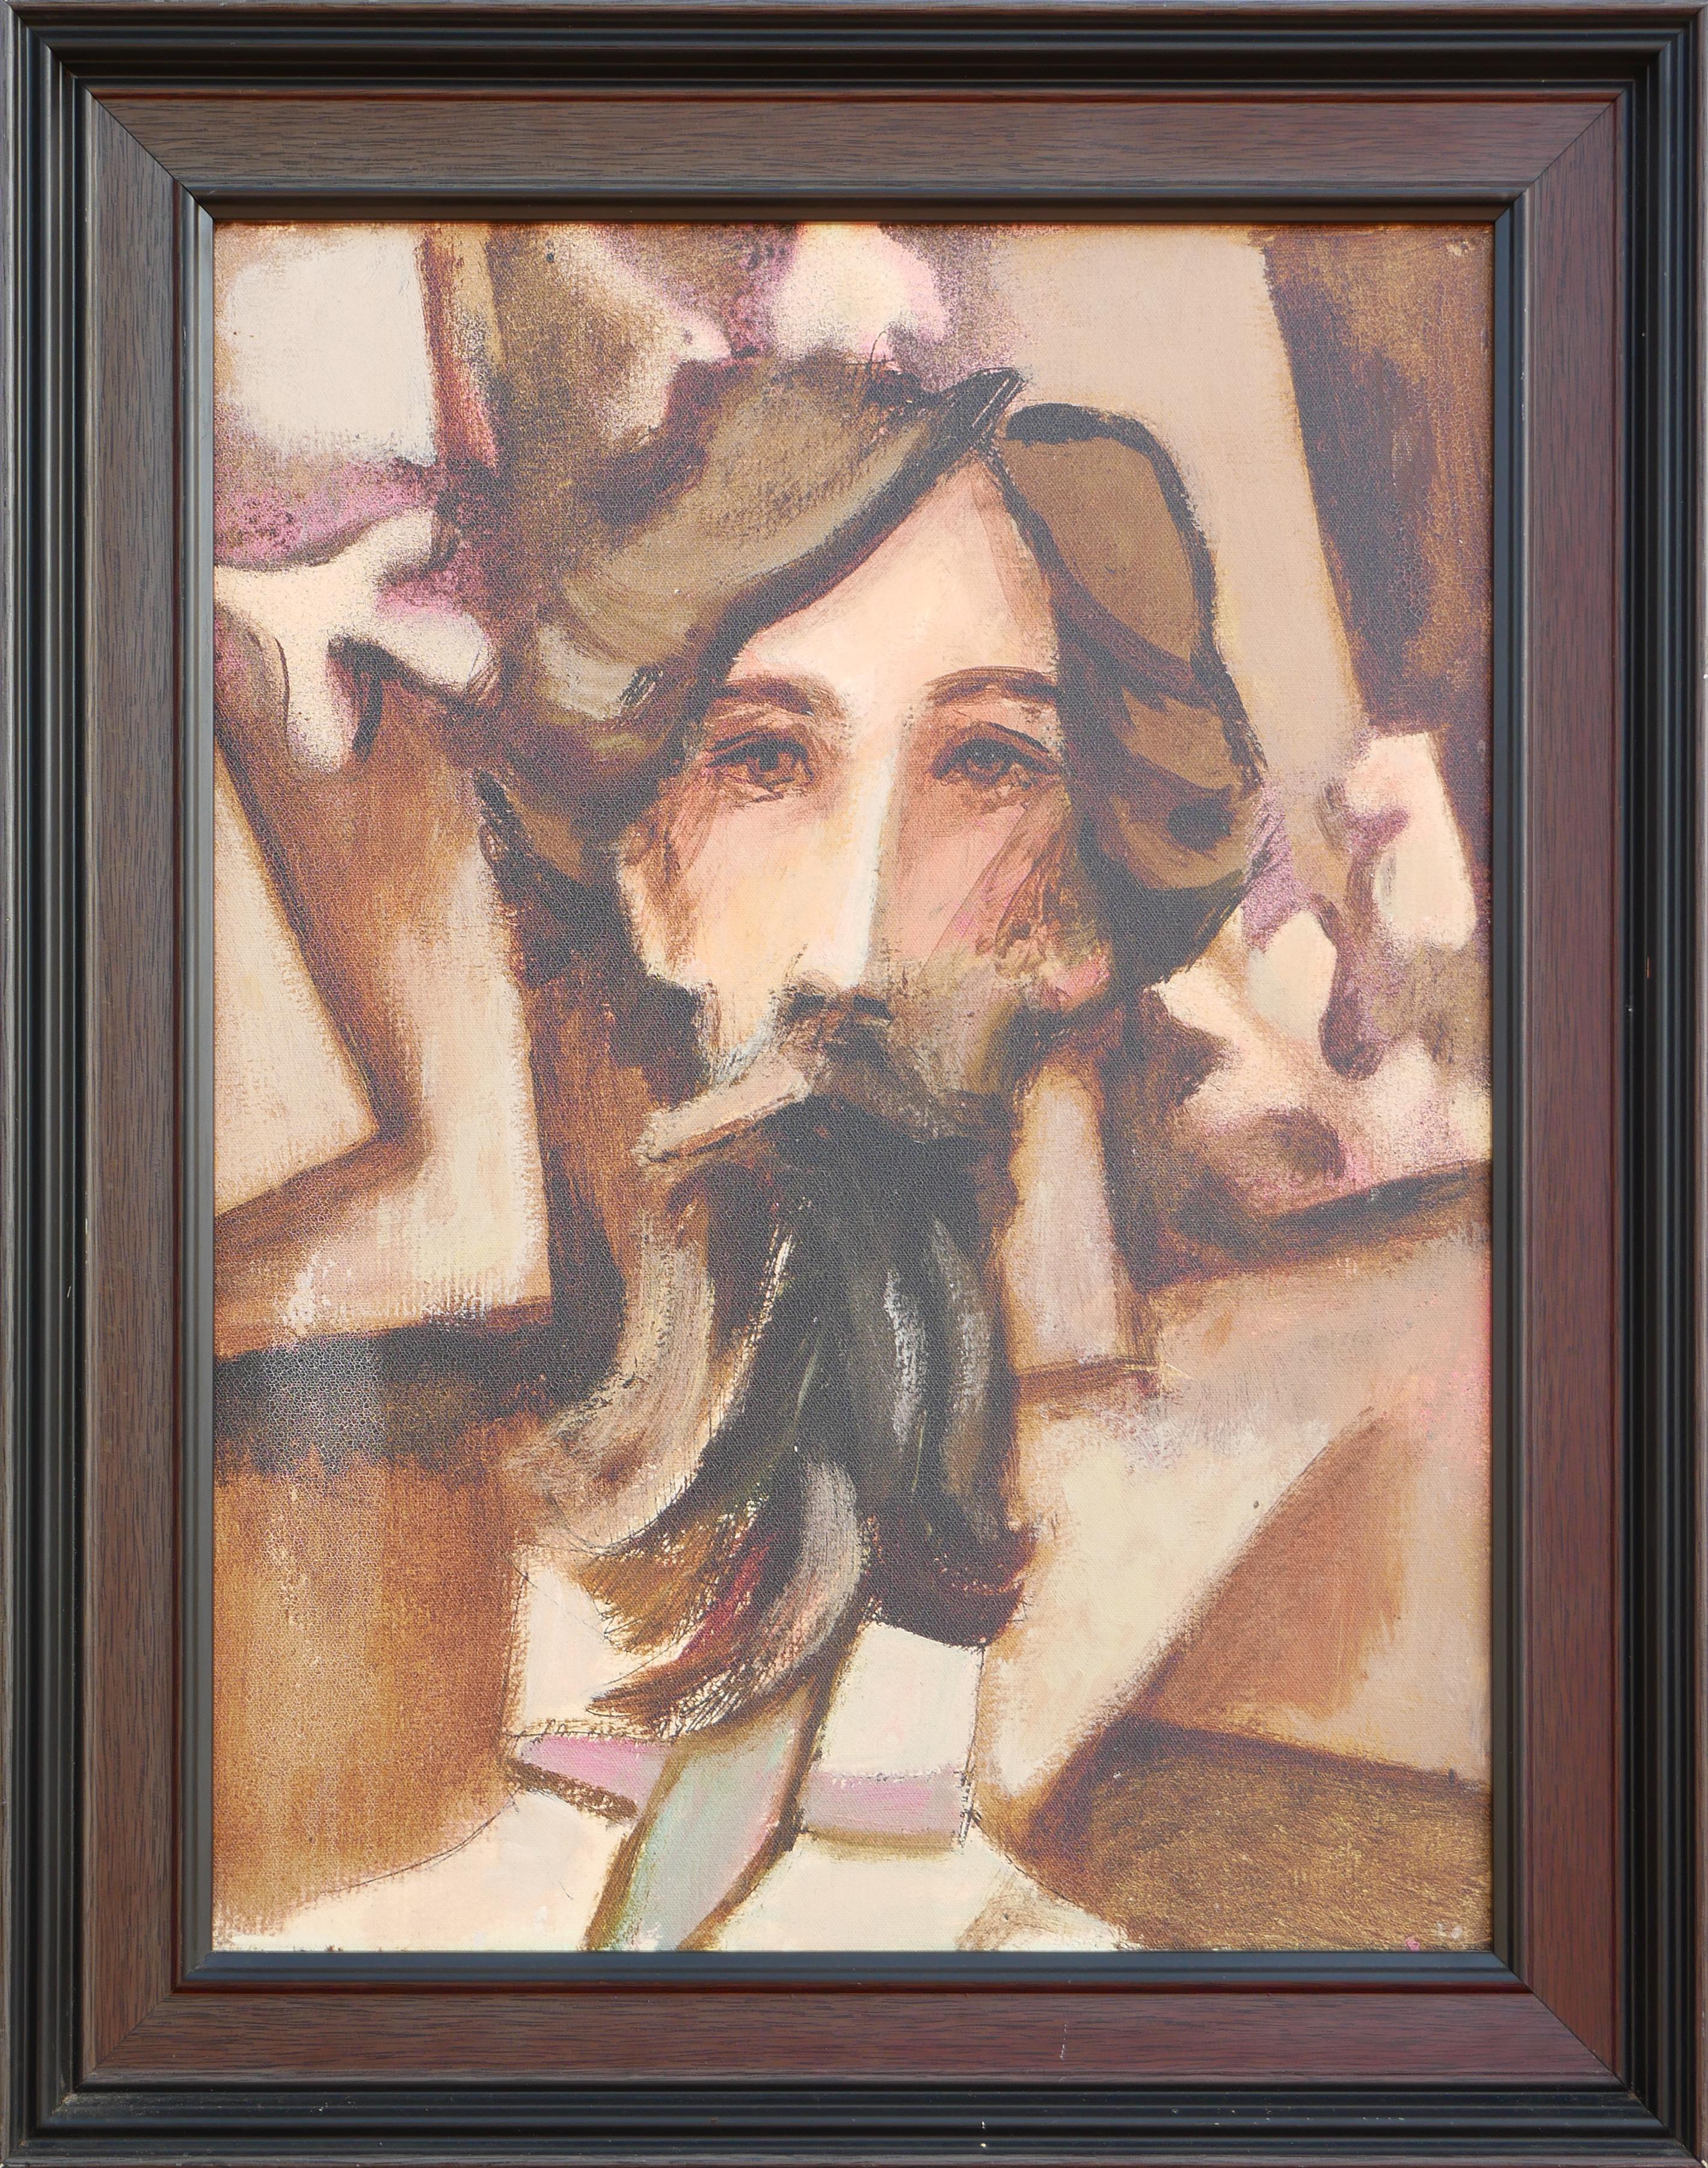 David Adickes Figurative Painting - "Cubist Head with Leaves" Modern Abstract Brown Toned Figurative Portrait Print